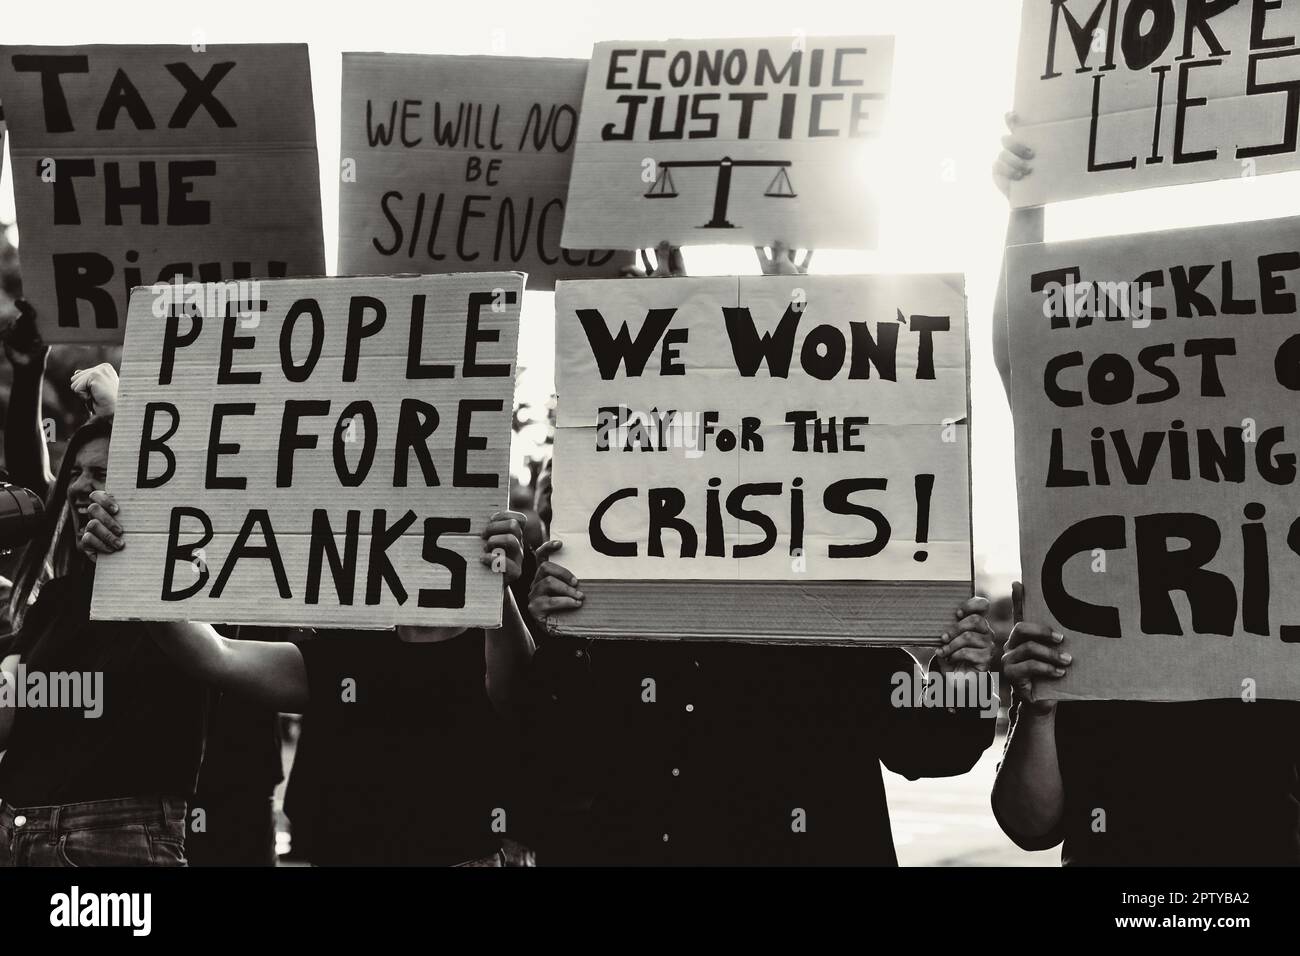 People protesting against financial crisis and global inflation - Economic justice activism concept - Black and white editing Stock Photo